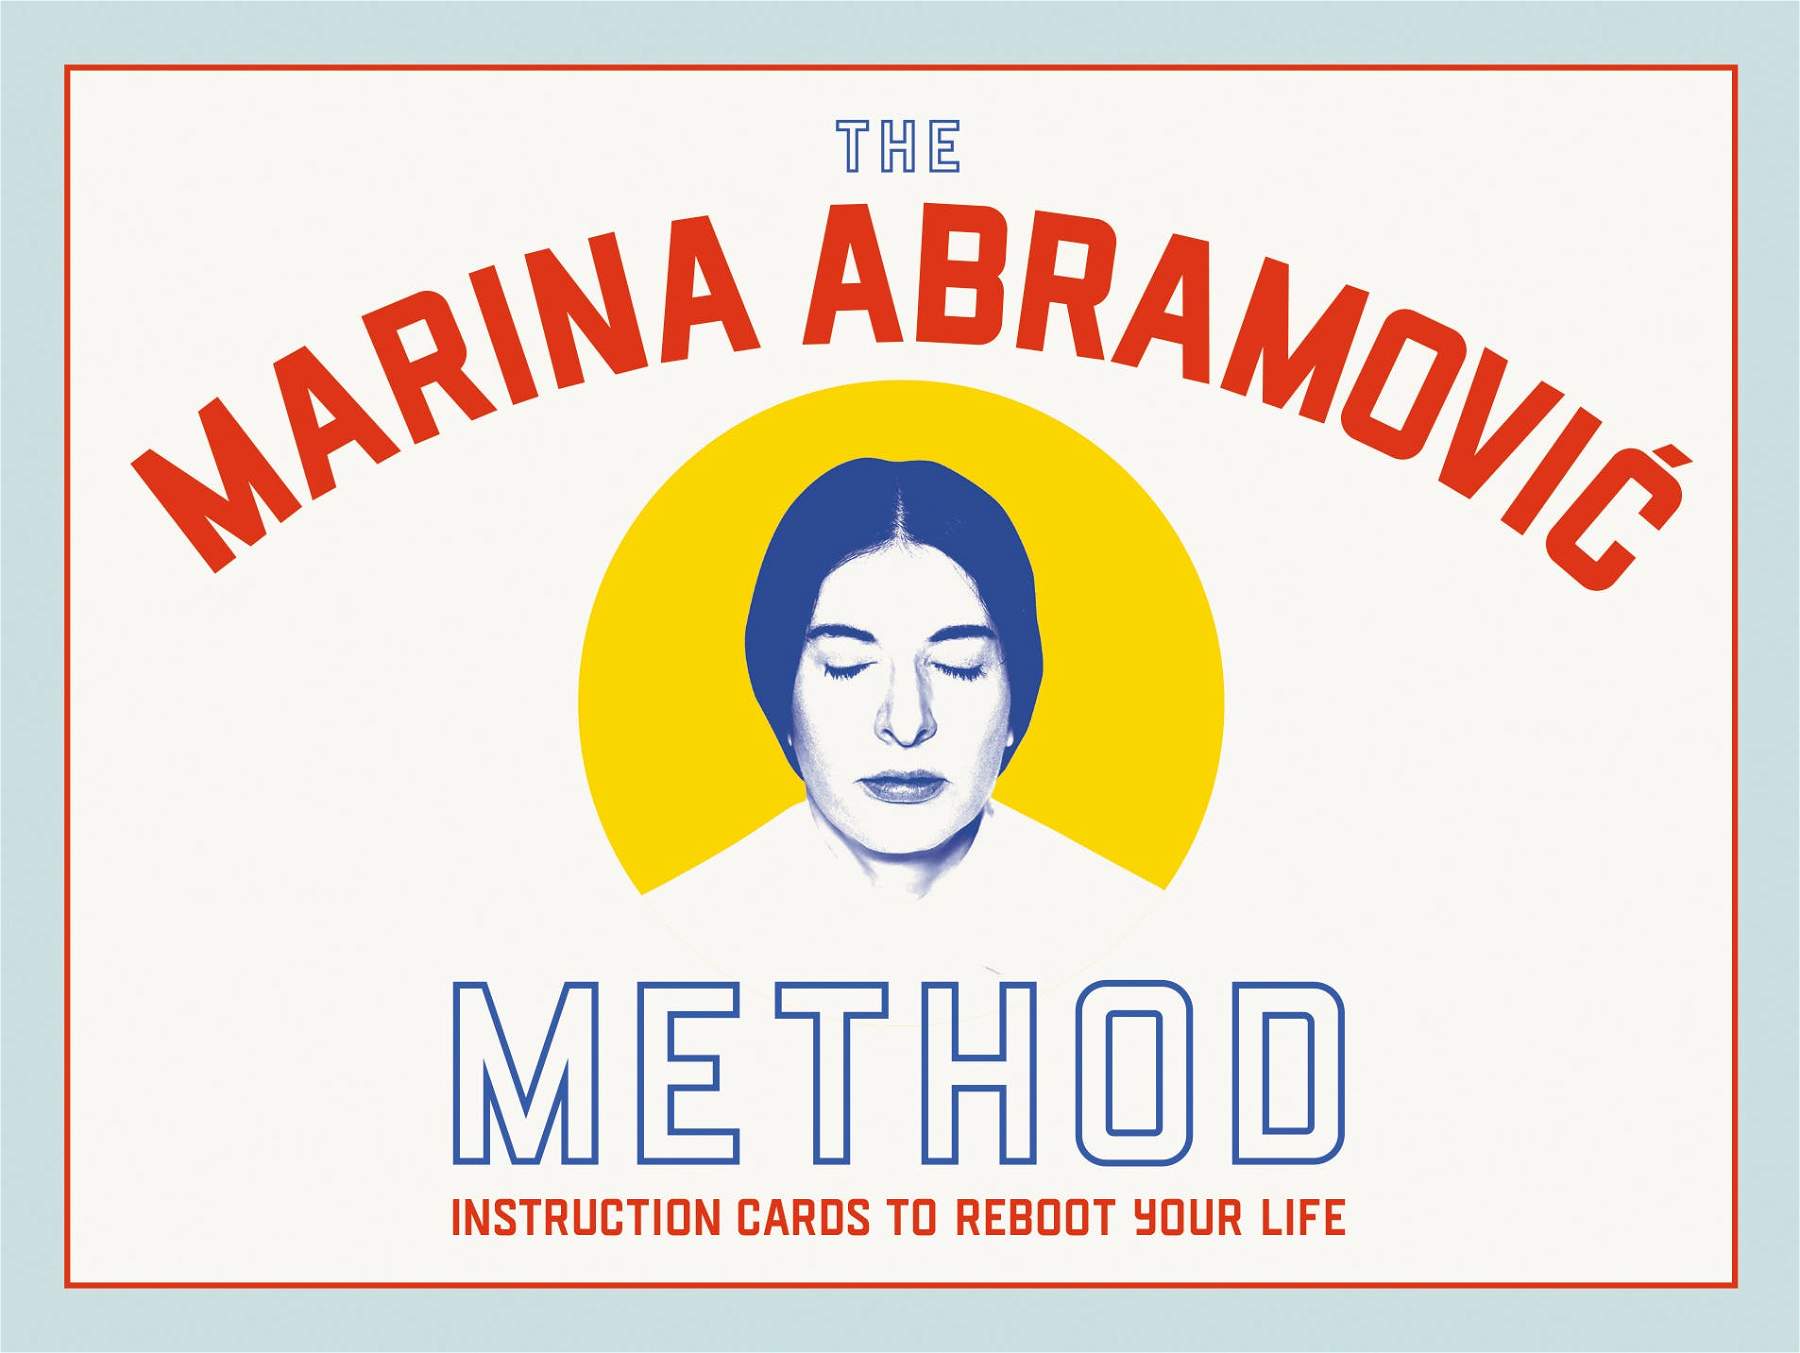 A lesson in serenity from Marina AbramoviÄ‡: here is her method for controlling emotions